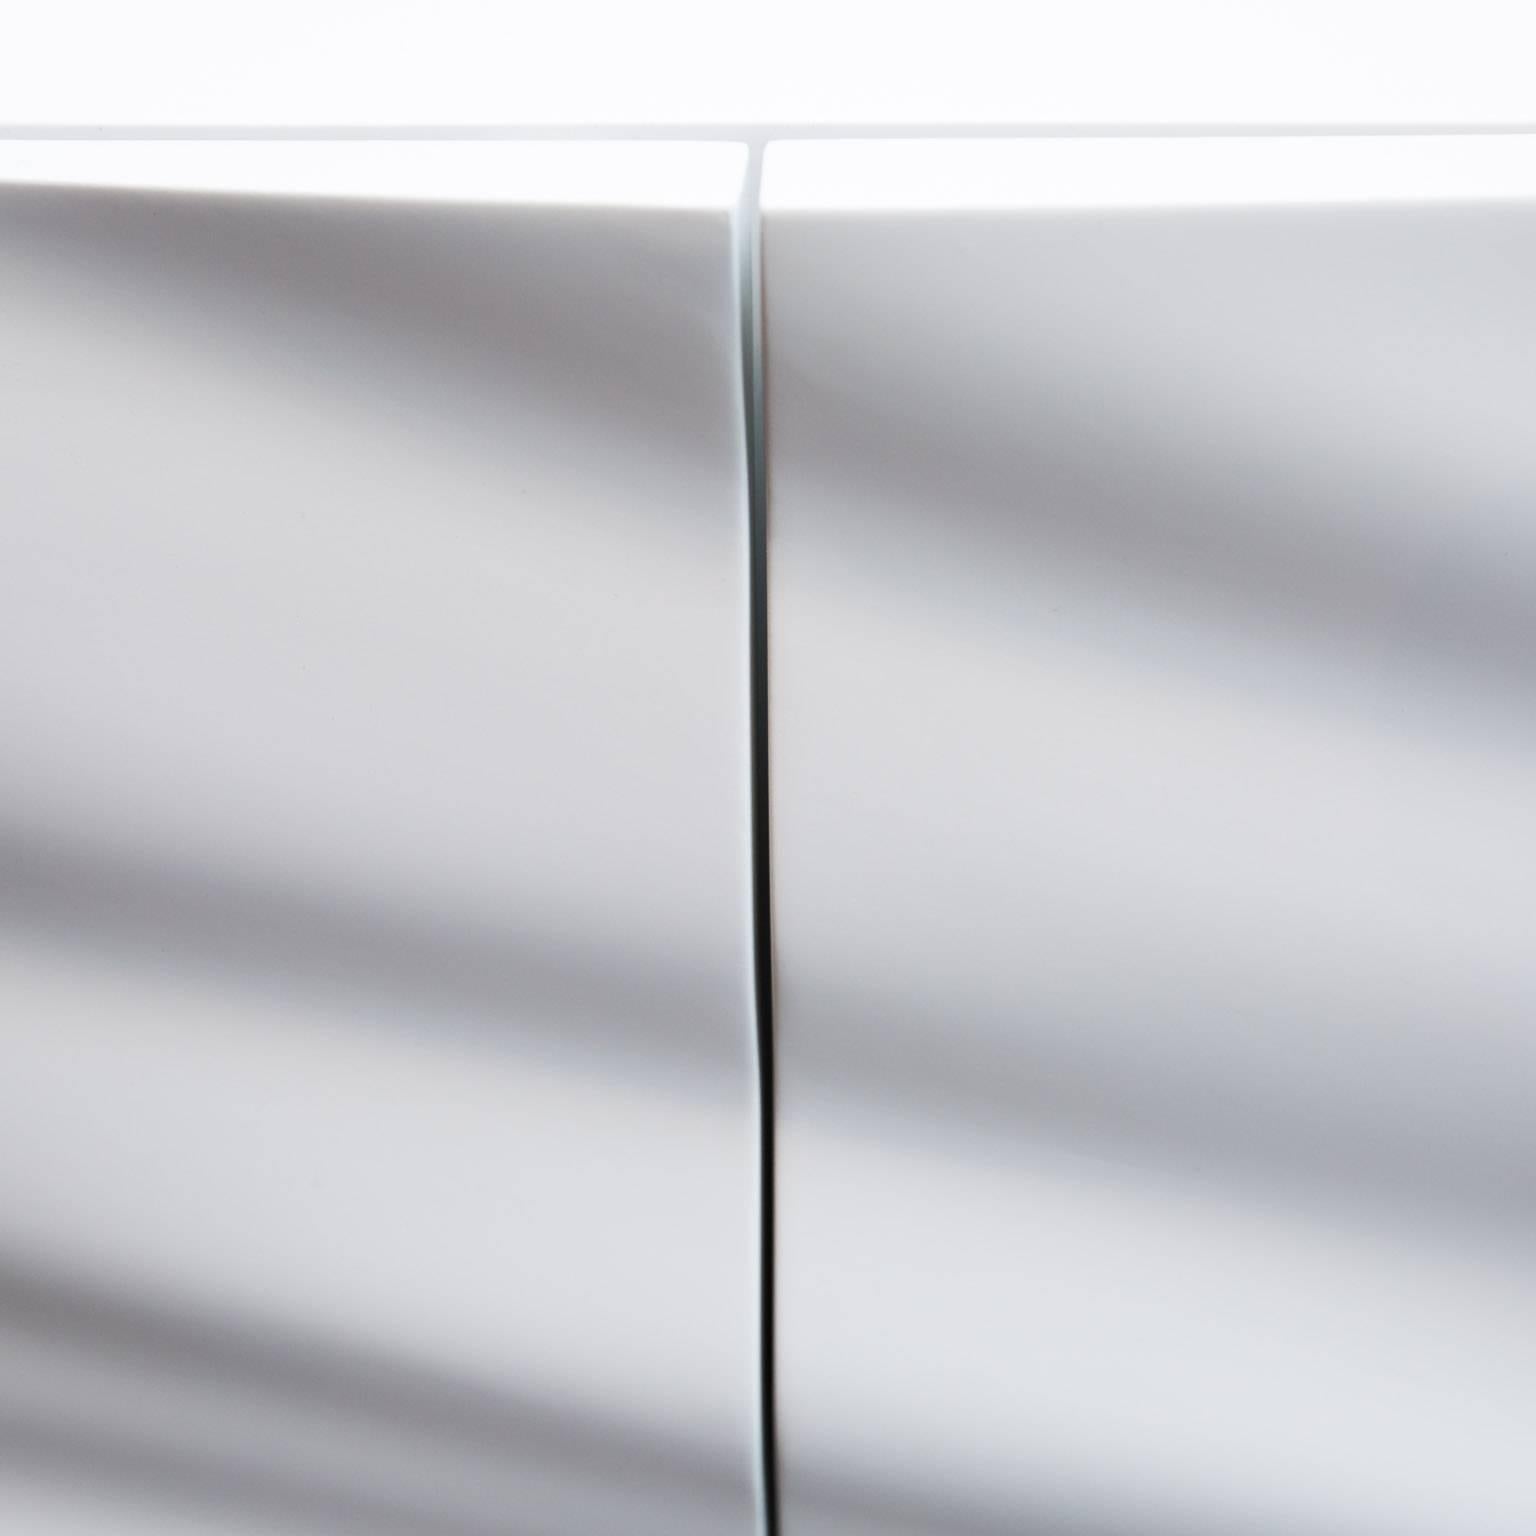 Designed by custom cabinetmaker Sam Poulos, this one-of-a-kind credenza is made of cad-designed medium density fiberboard. Finished in a satin white lacquer with brushed aluminum legs. Its three compartments include two deep drawers left and right